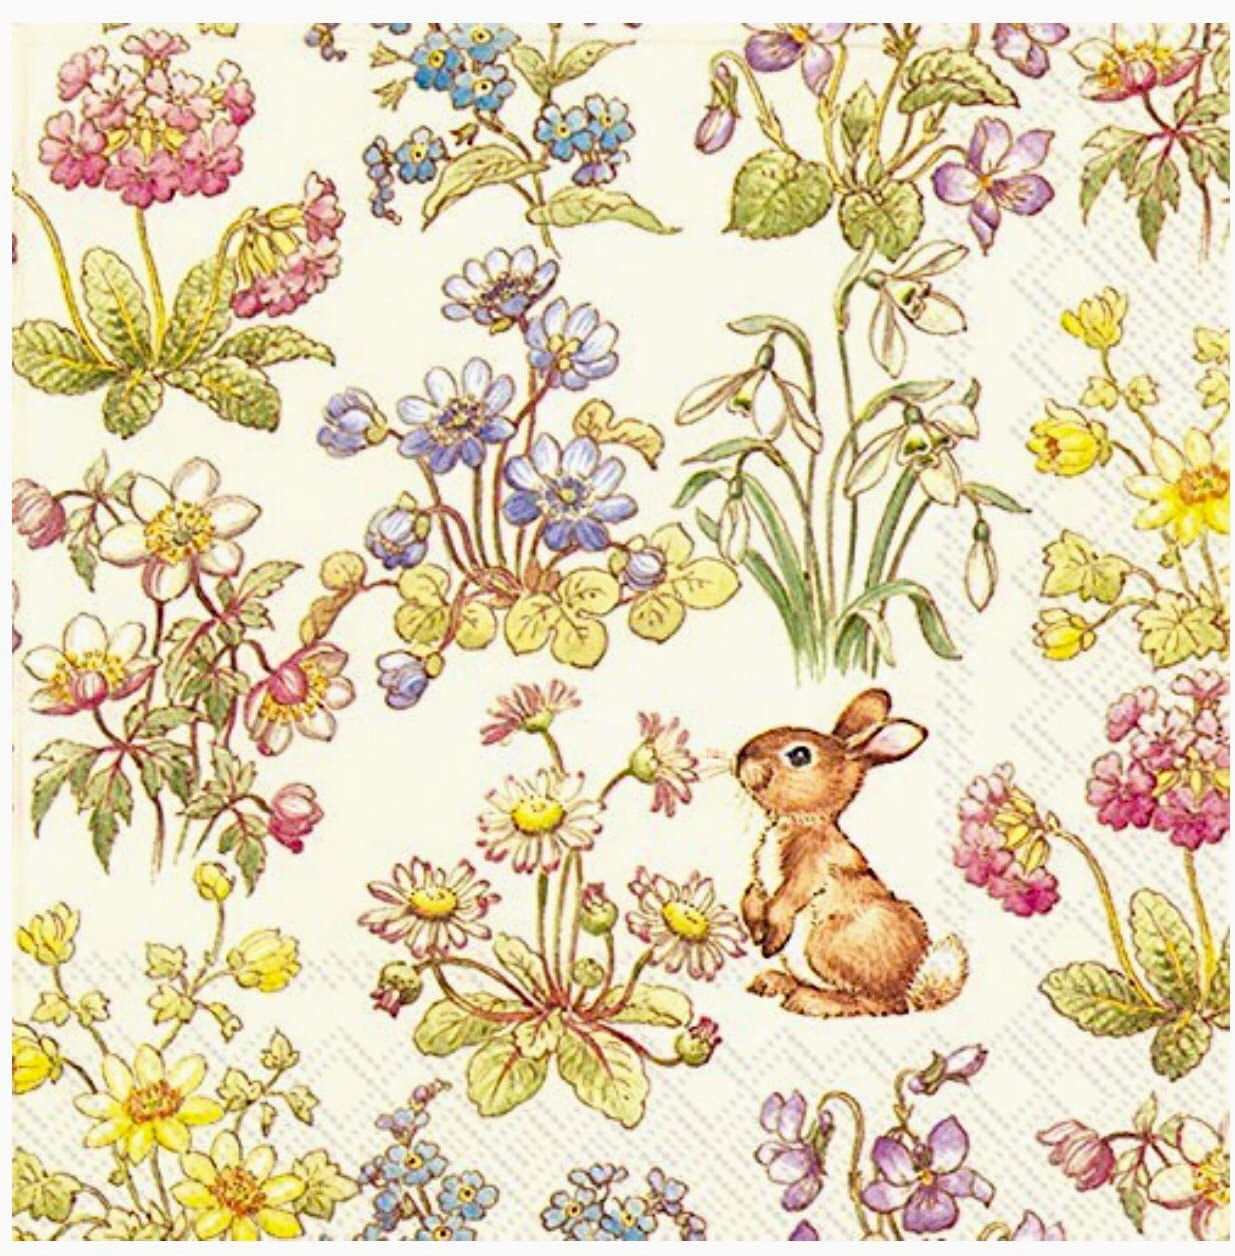 MesaFina Snoopy Little Rabbit Paper Luncheon Napkins 40-ct 